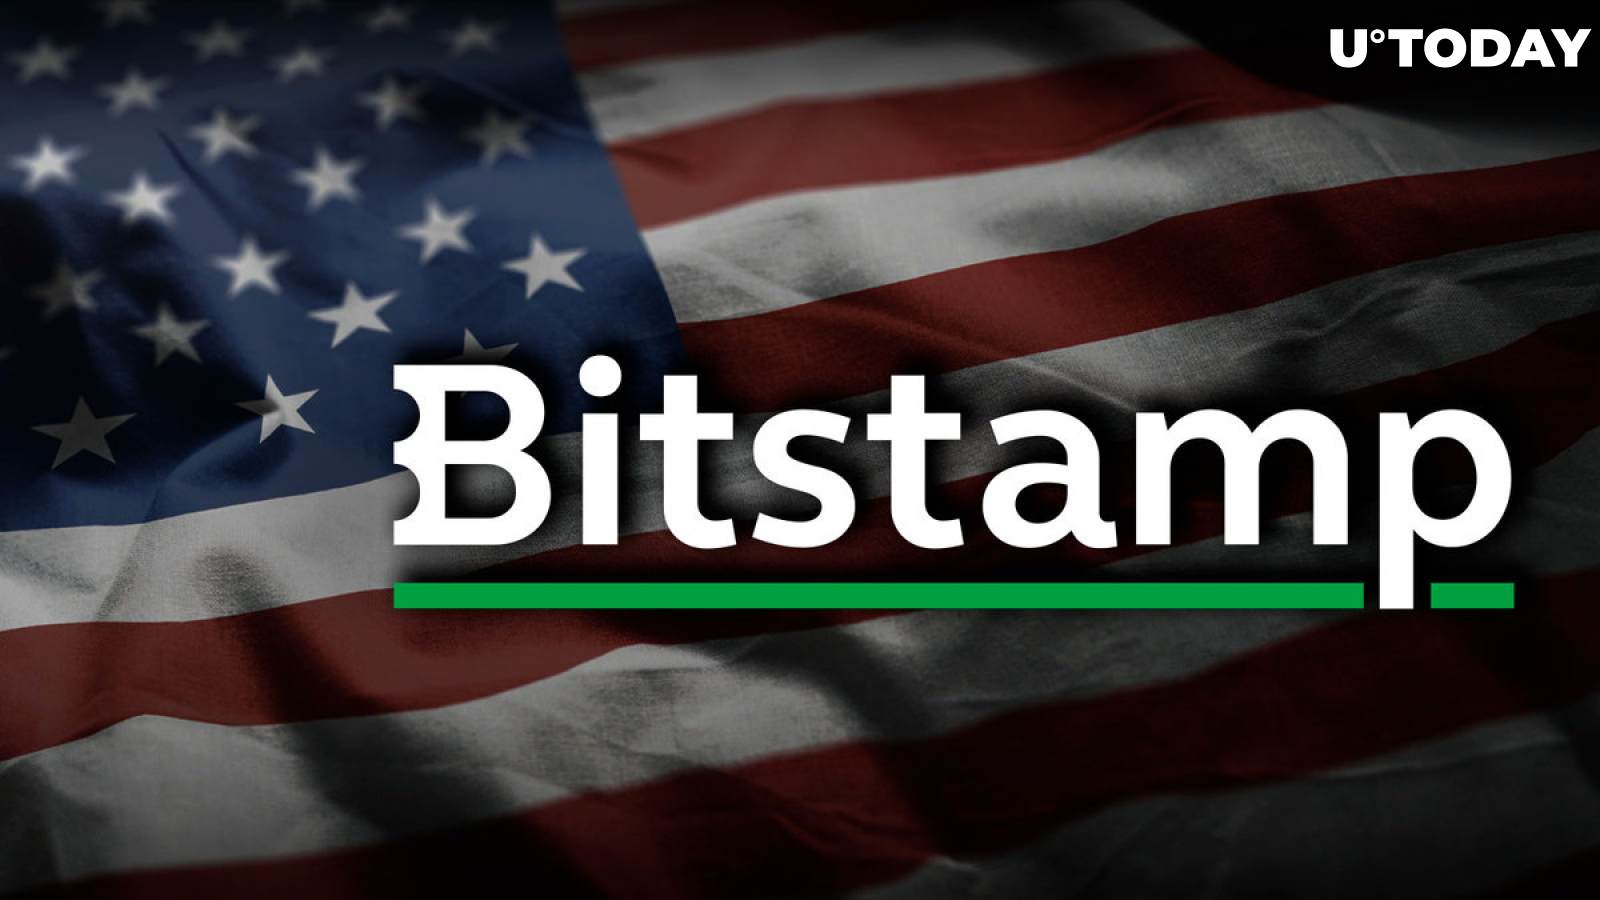 Bitstamp to Wind Down Staking Services in US